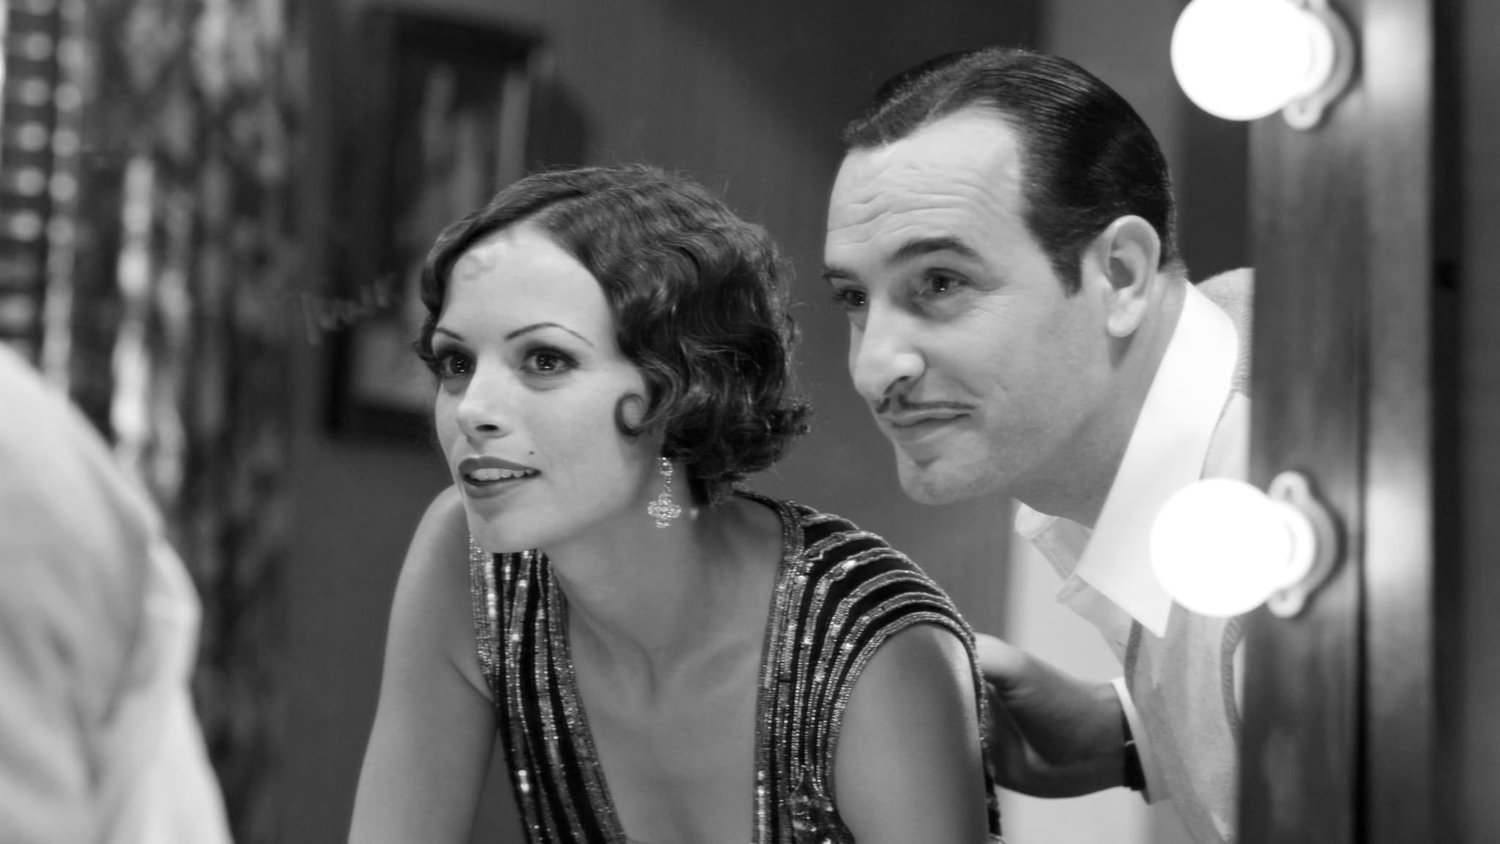 4. A silent movie, 'The Artist,' silenced the doubters.